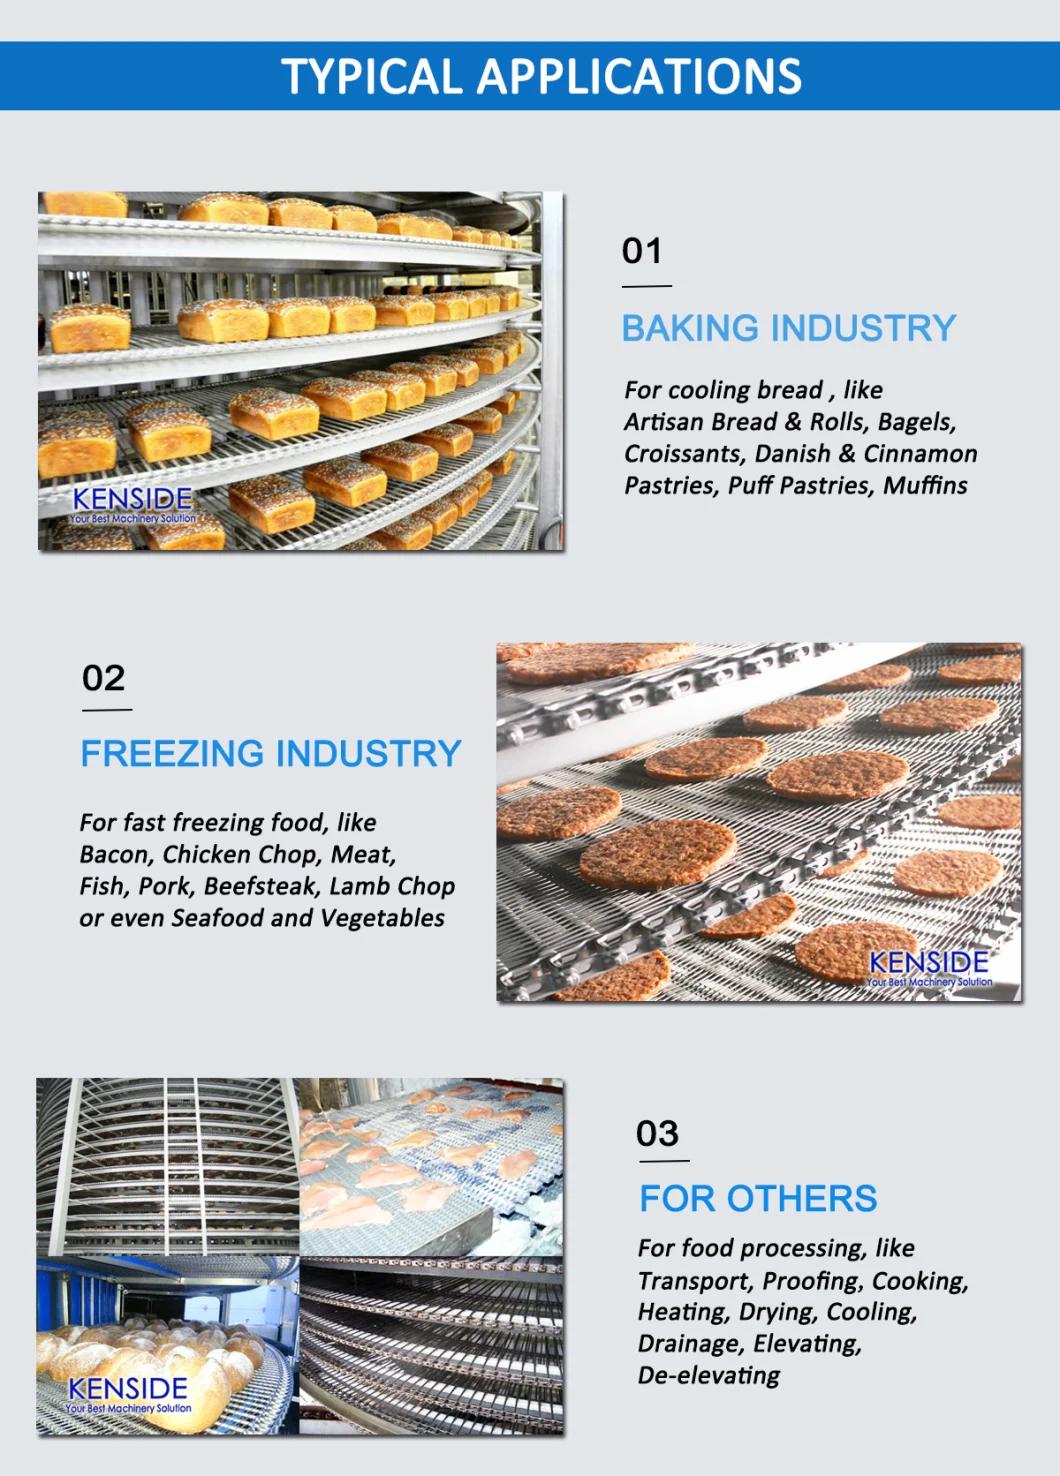 Stainless Steel Belting Spiral Conveyor Belts Reduced Radius Belts for The Food Industry